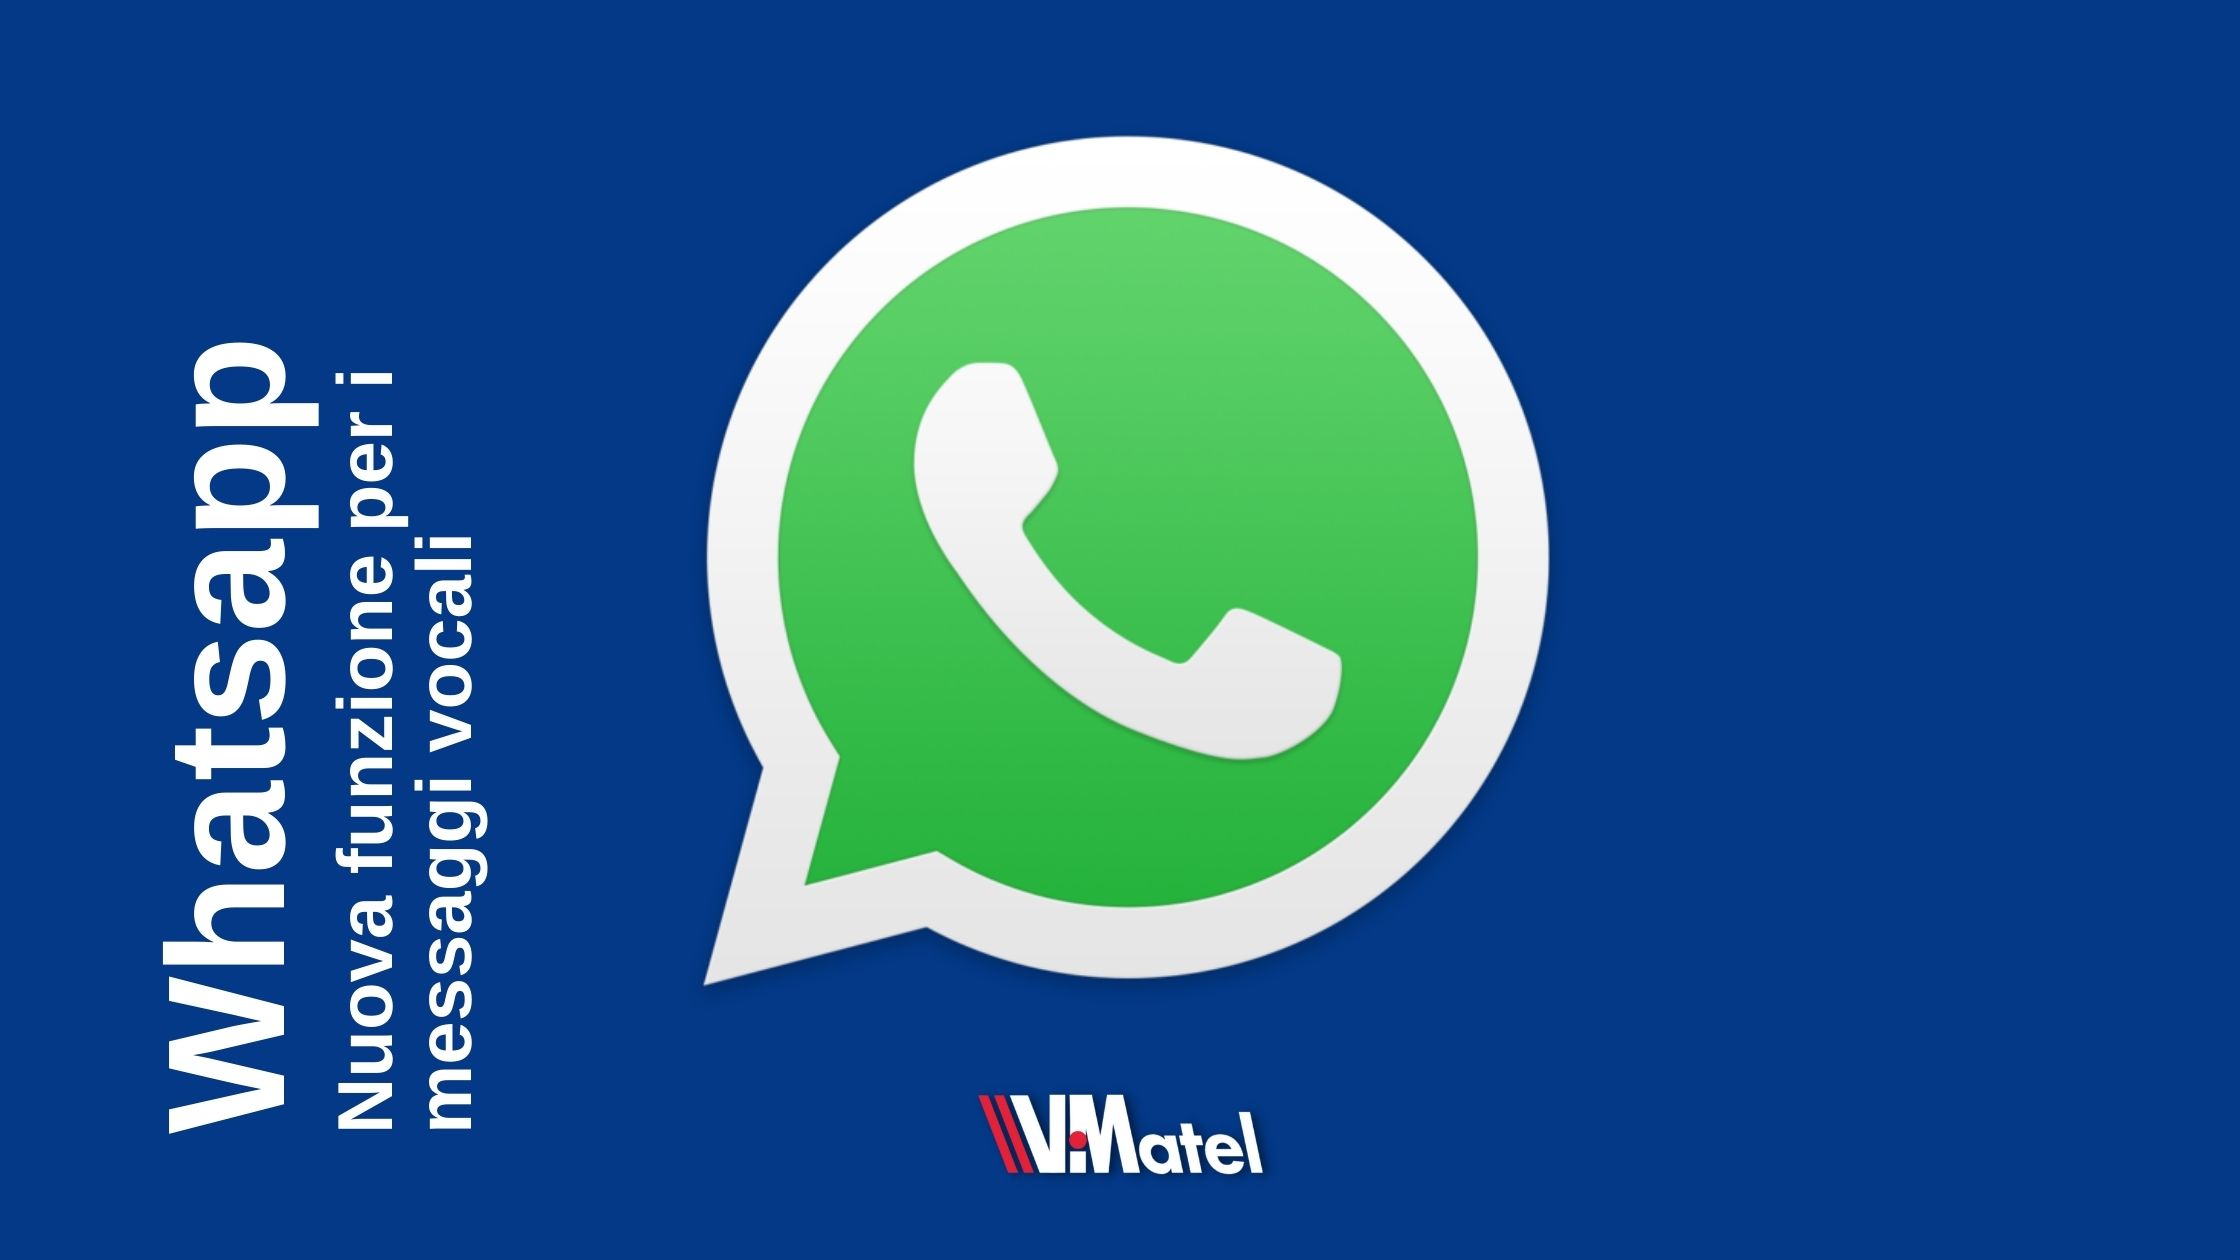 Whatsapp: the audio to text function is coming